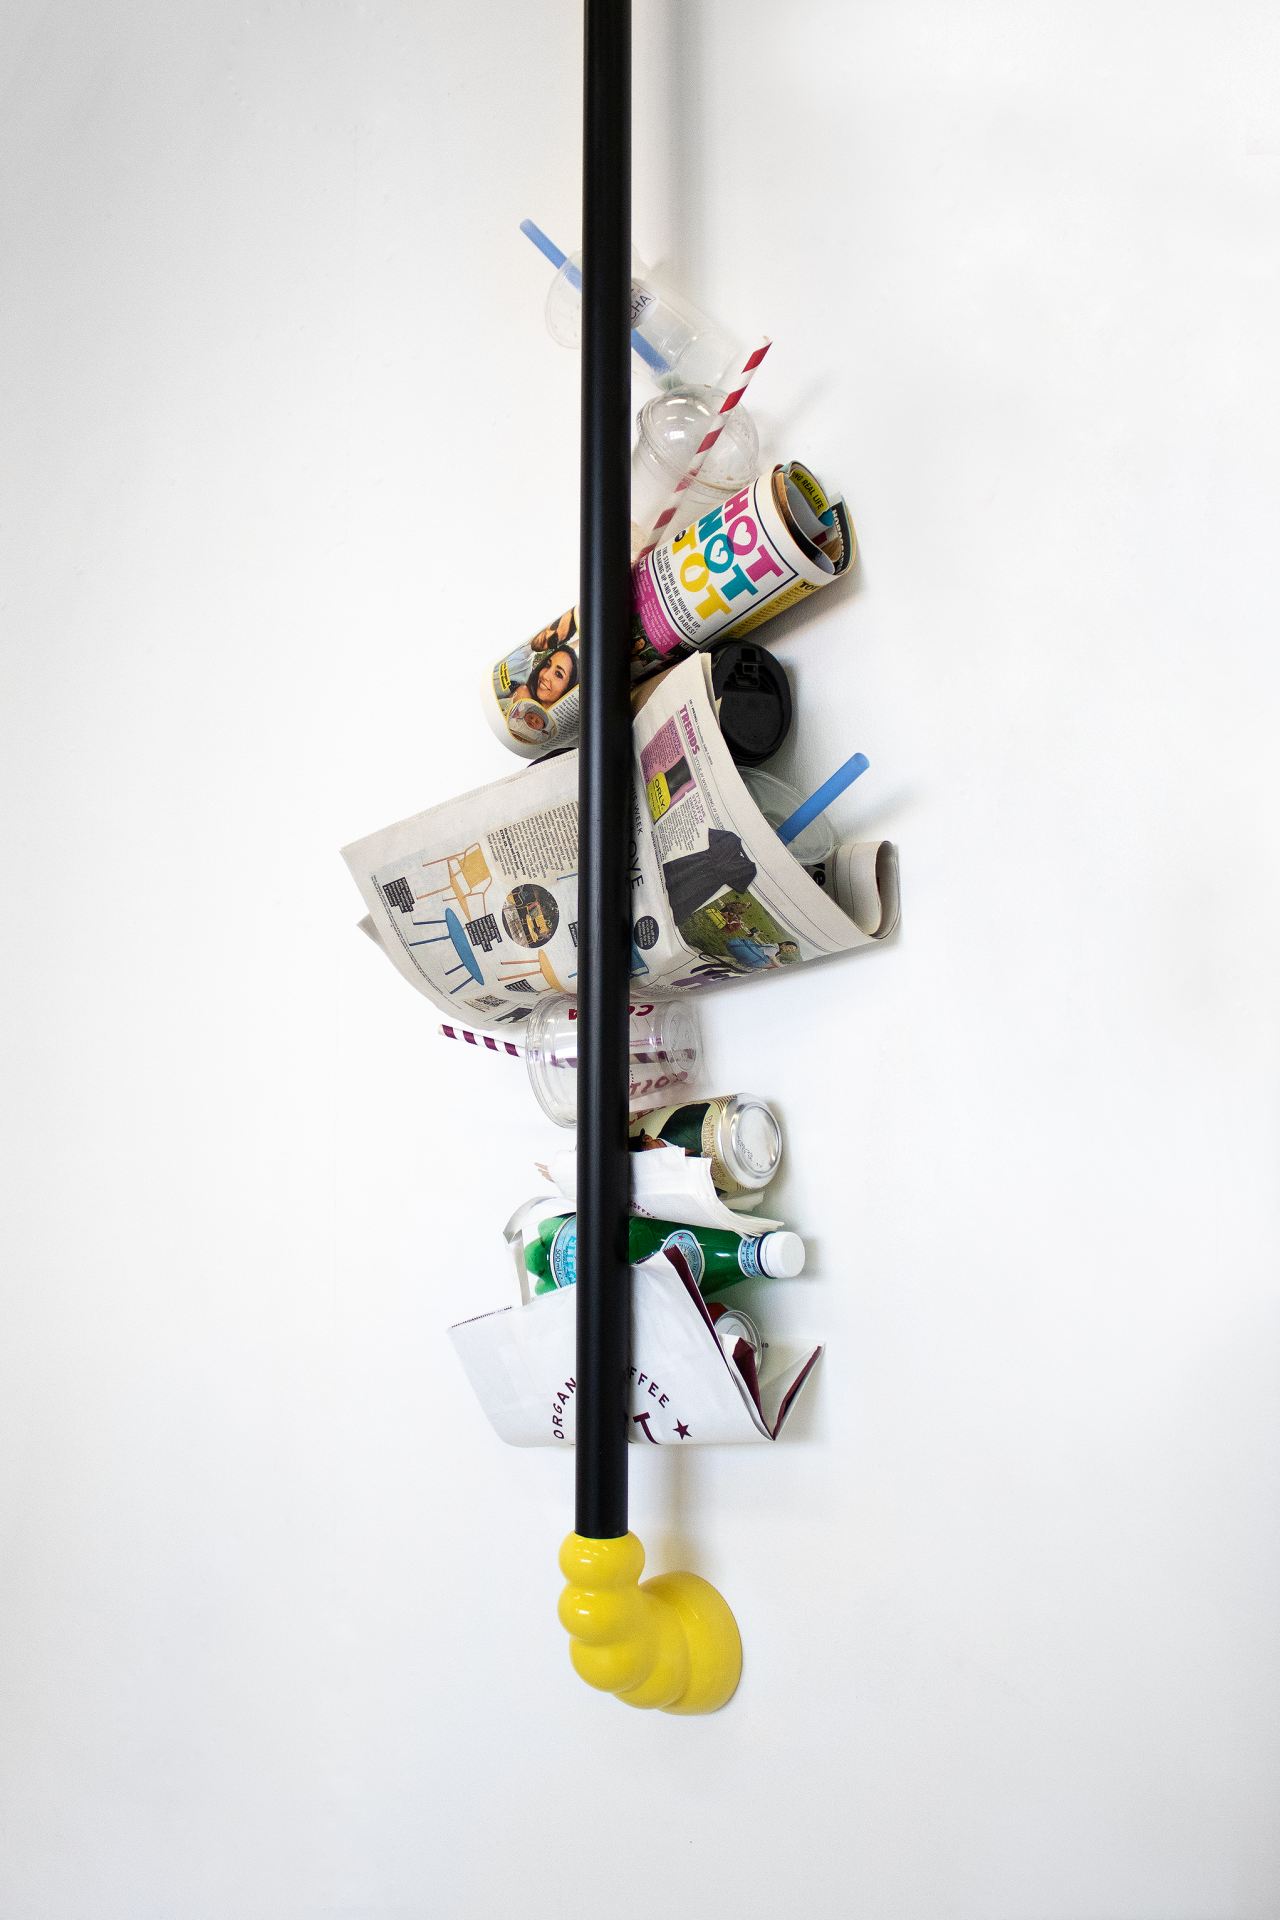 Black ABS pipe connected to the wall with two yellow 3d printed fittings. Between the wall to the pipe, there is stacked rubbish; plastic takeaway cups, newspapers and beer cans.  